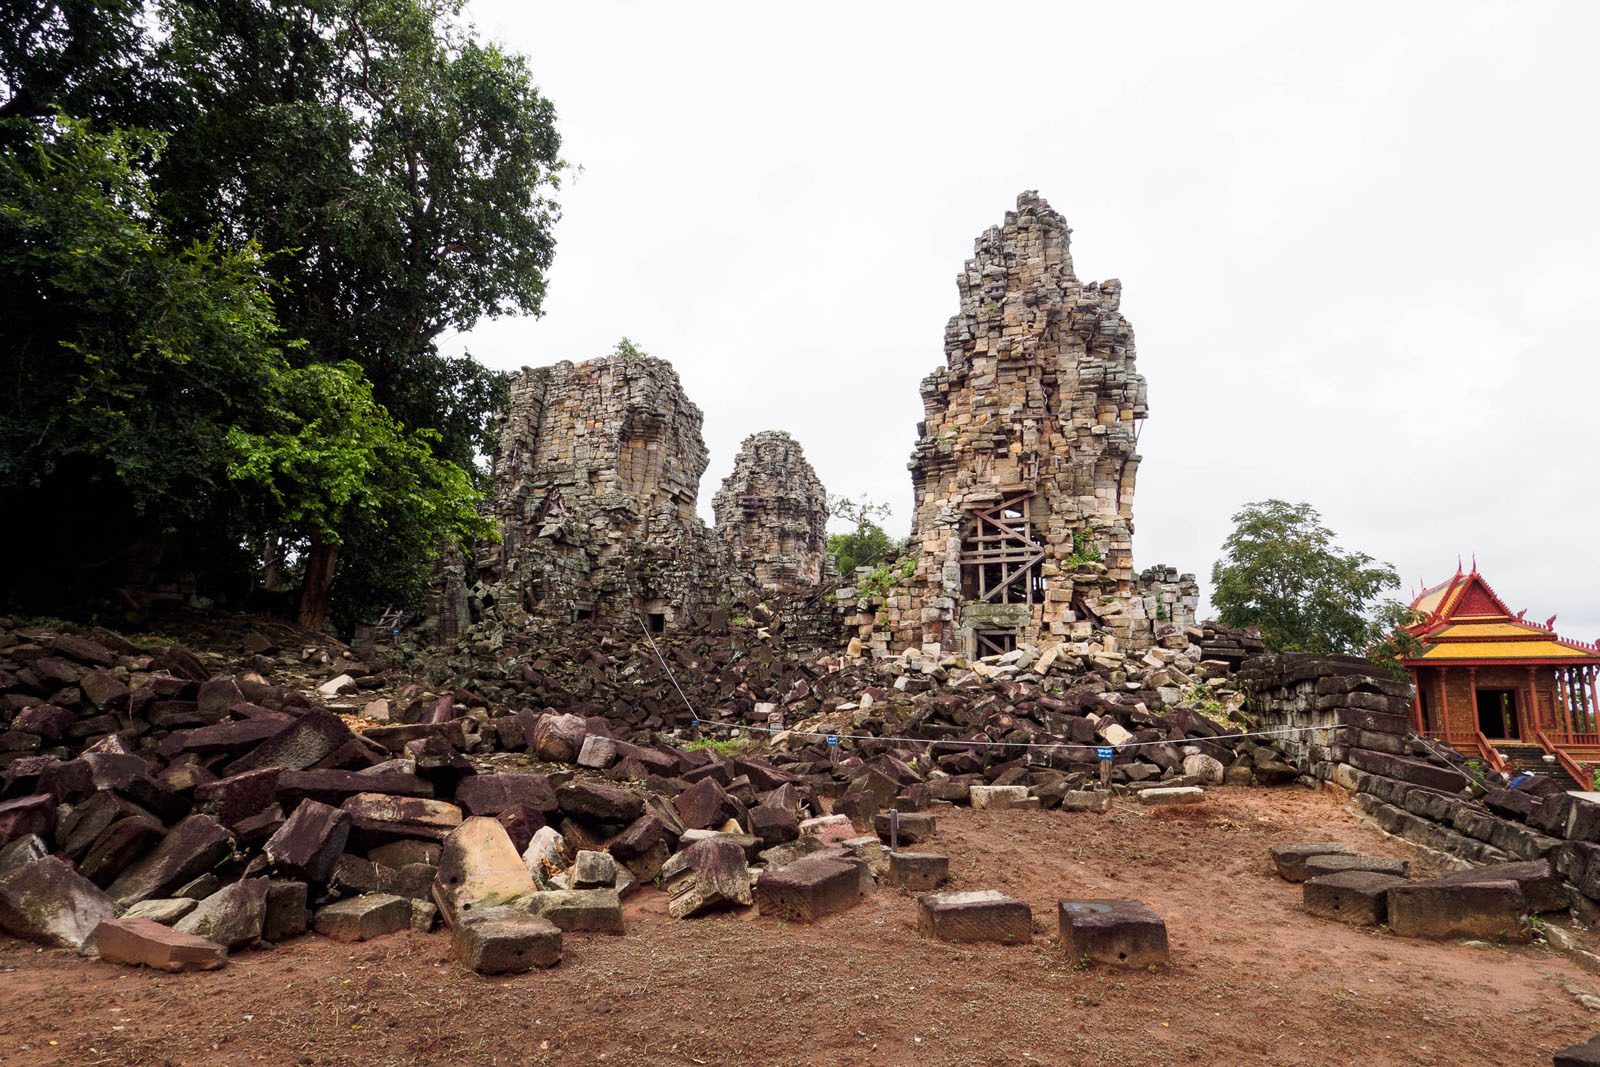 The ruins of a temple at Banteay Chhmar. Photo by Emily Lush